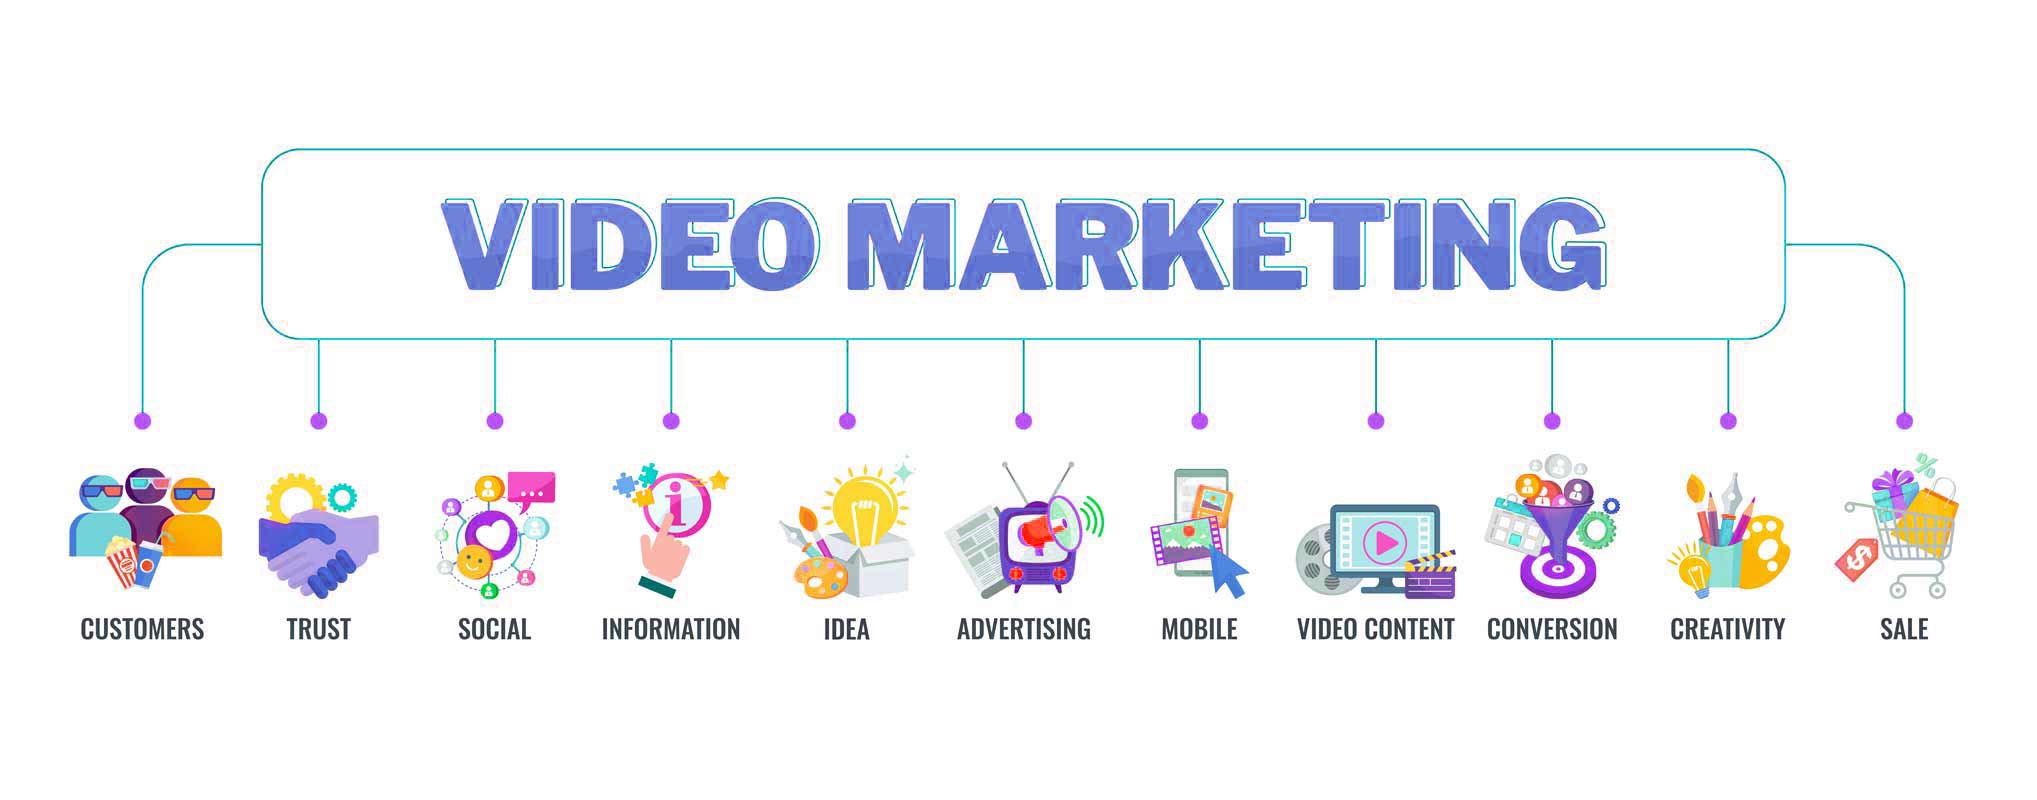 marketing video for business info graphic